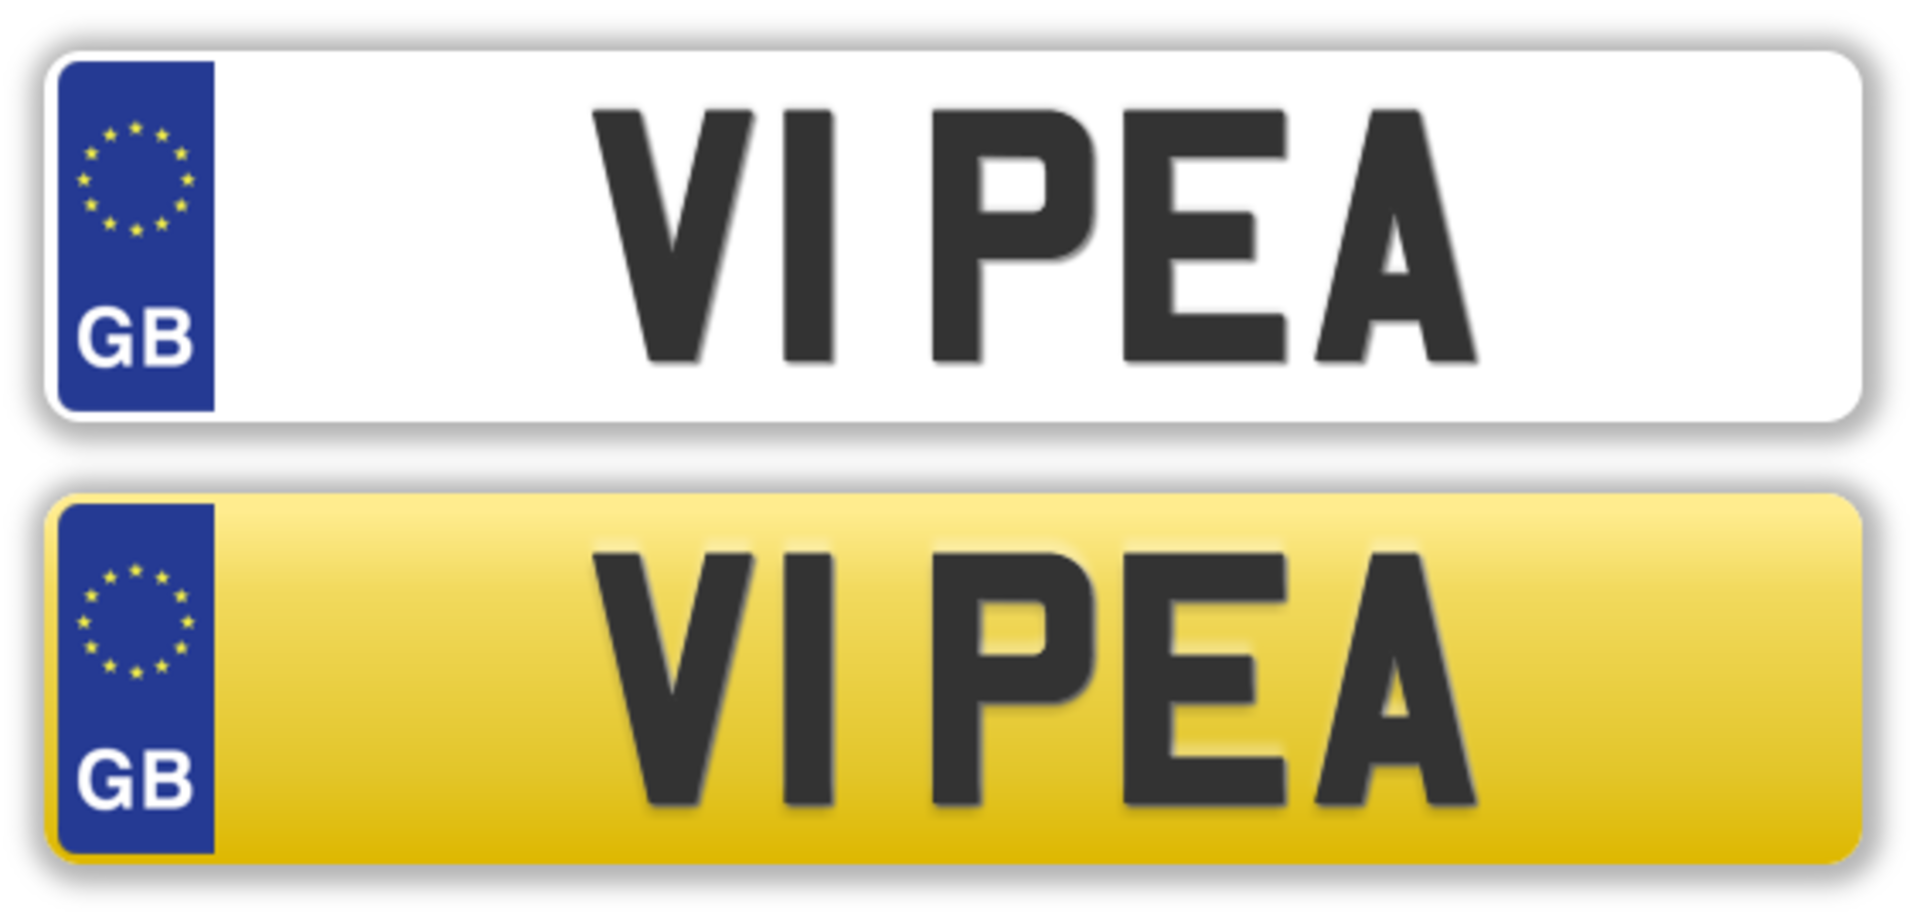 Cherished Plate - V1 PEA - No transfer fees. All registrations on retention and ready to transfer.